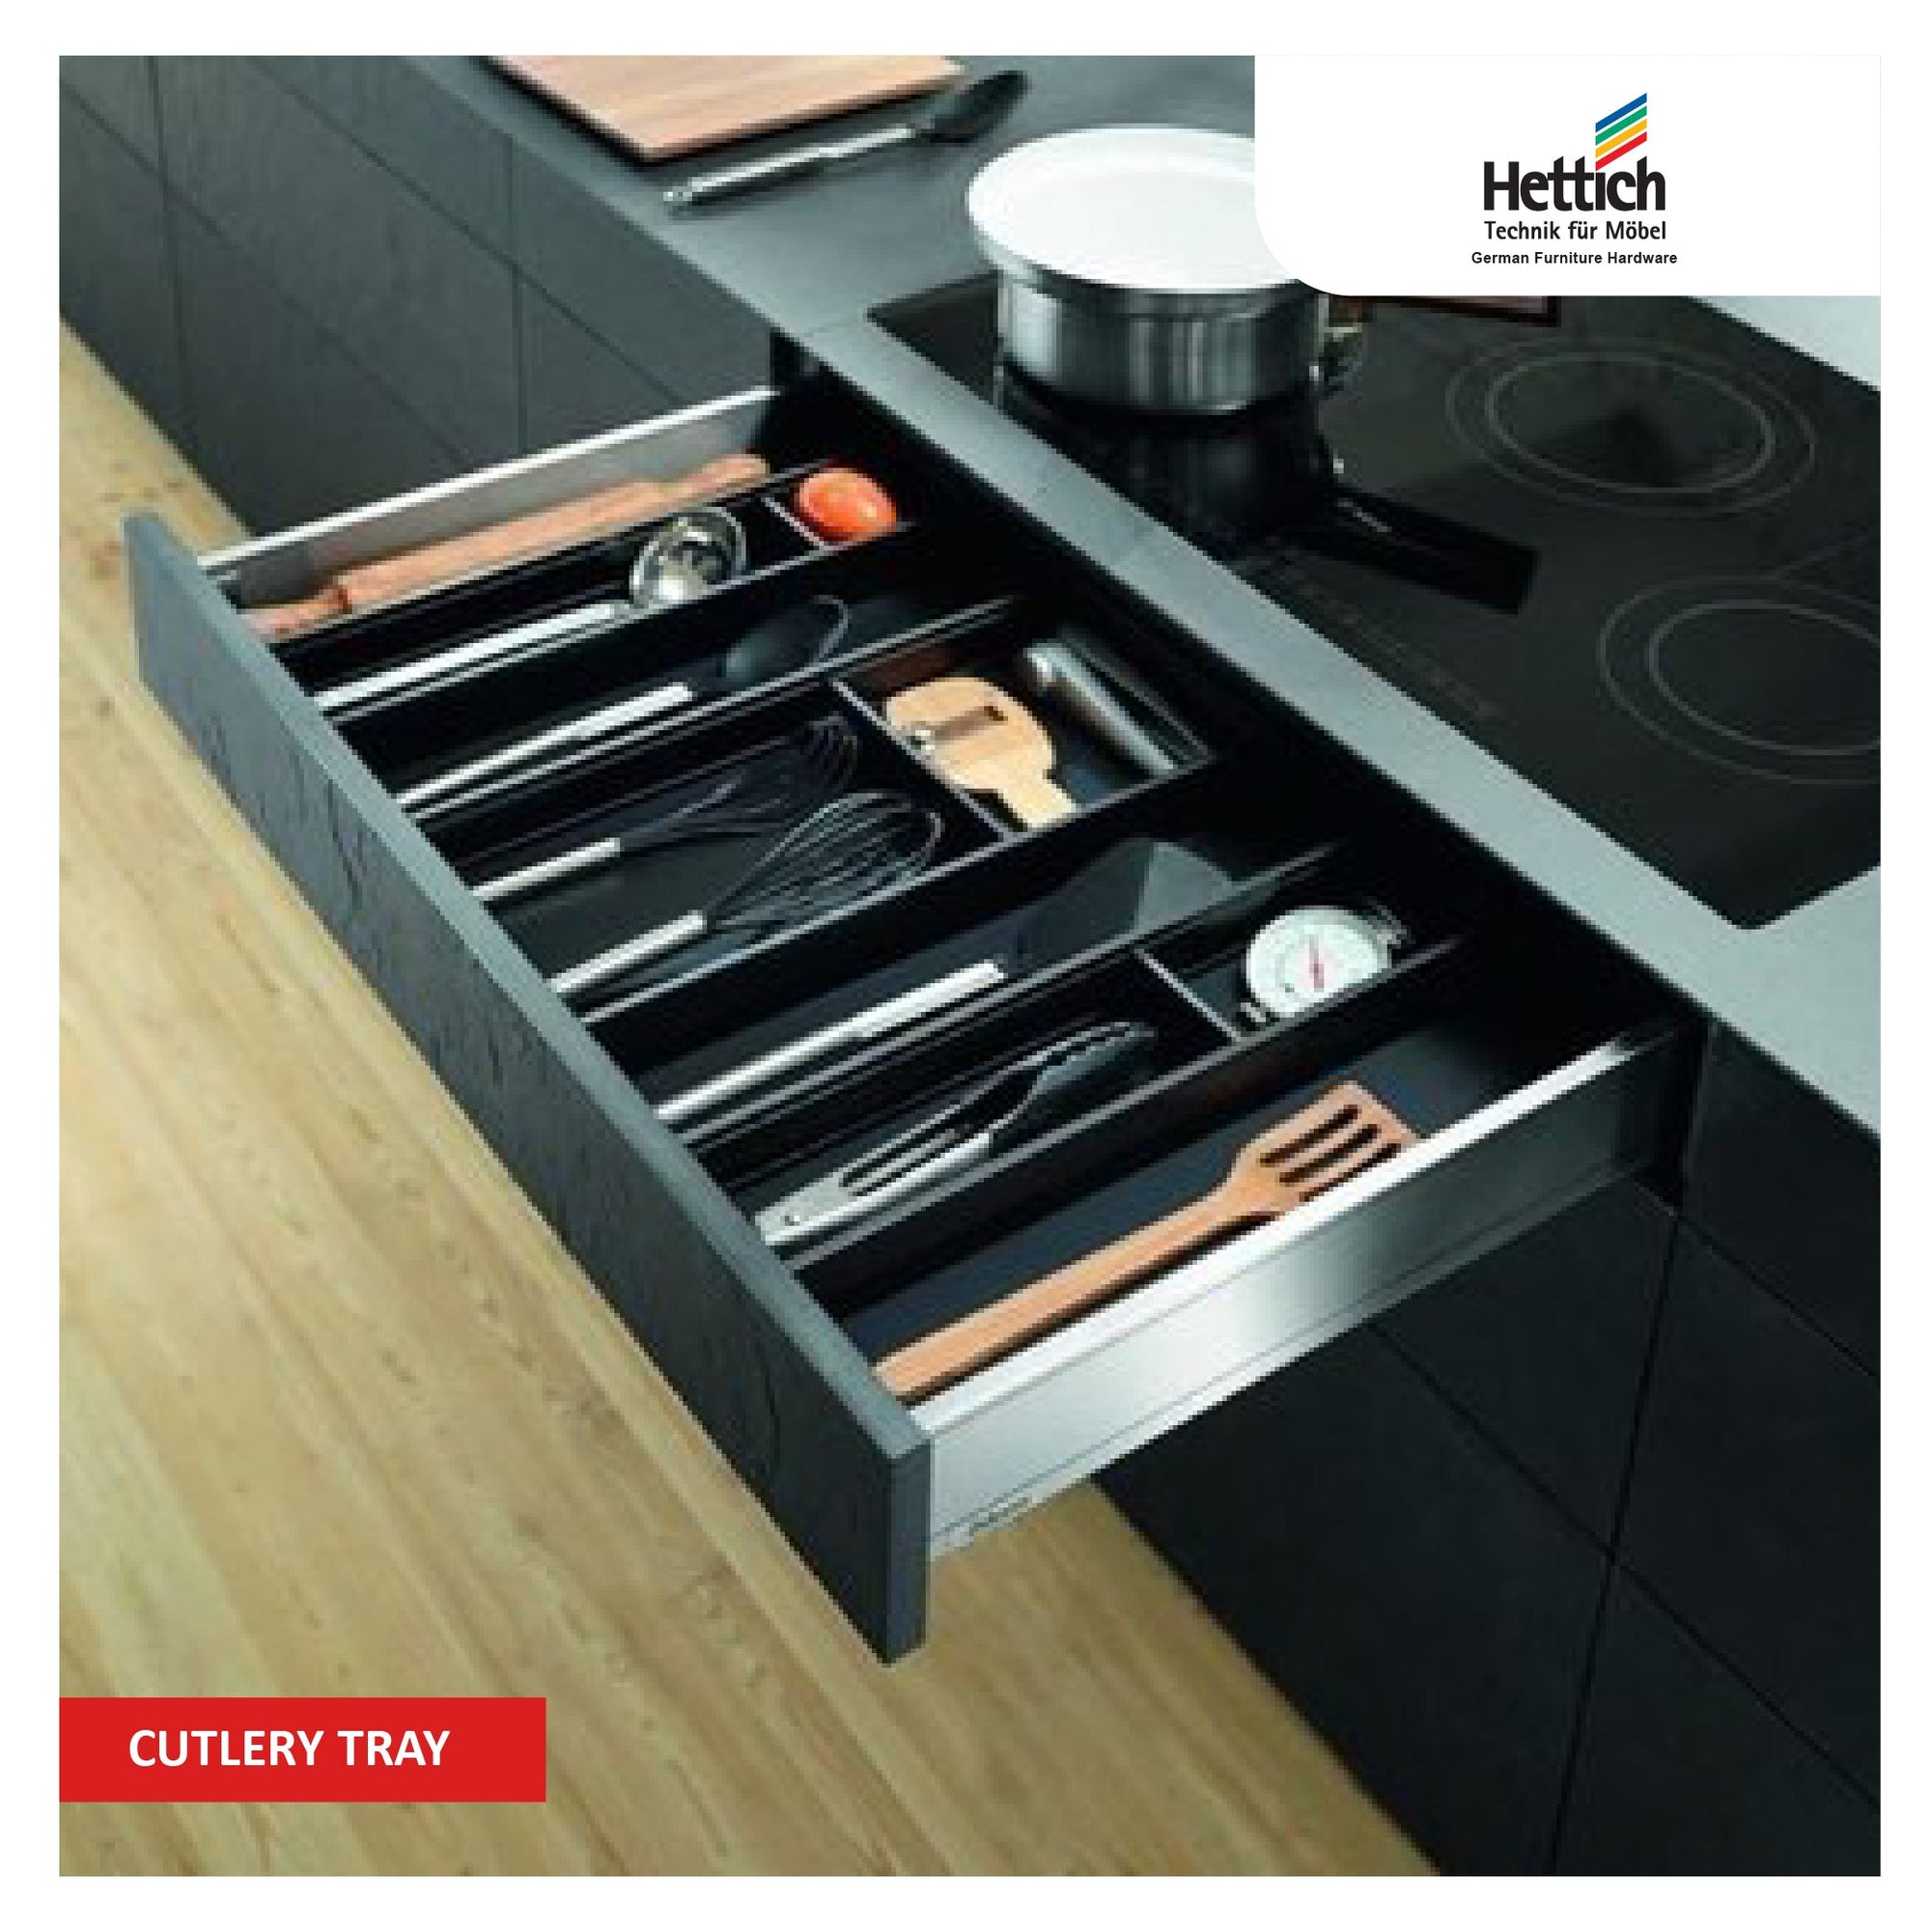 Organized kitchen drawers with Hettich Cutlery Trays by M. M. Noorbhoy & Co - High-quality trays for efficient storage and easy access.